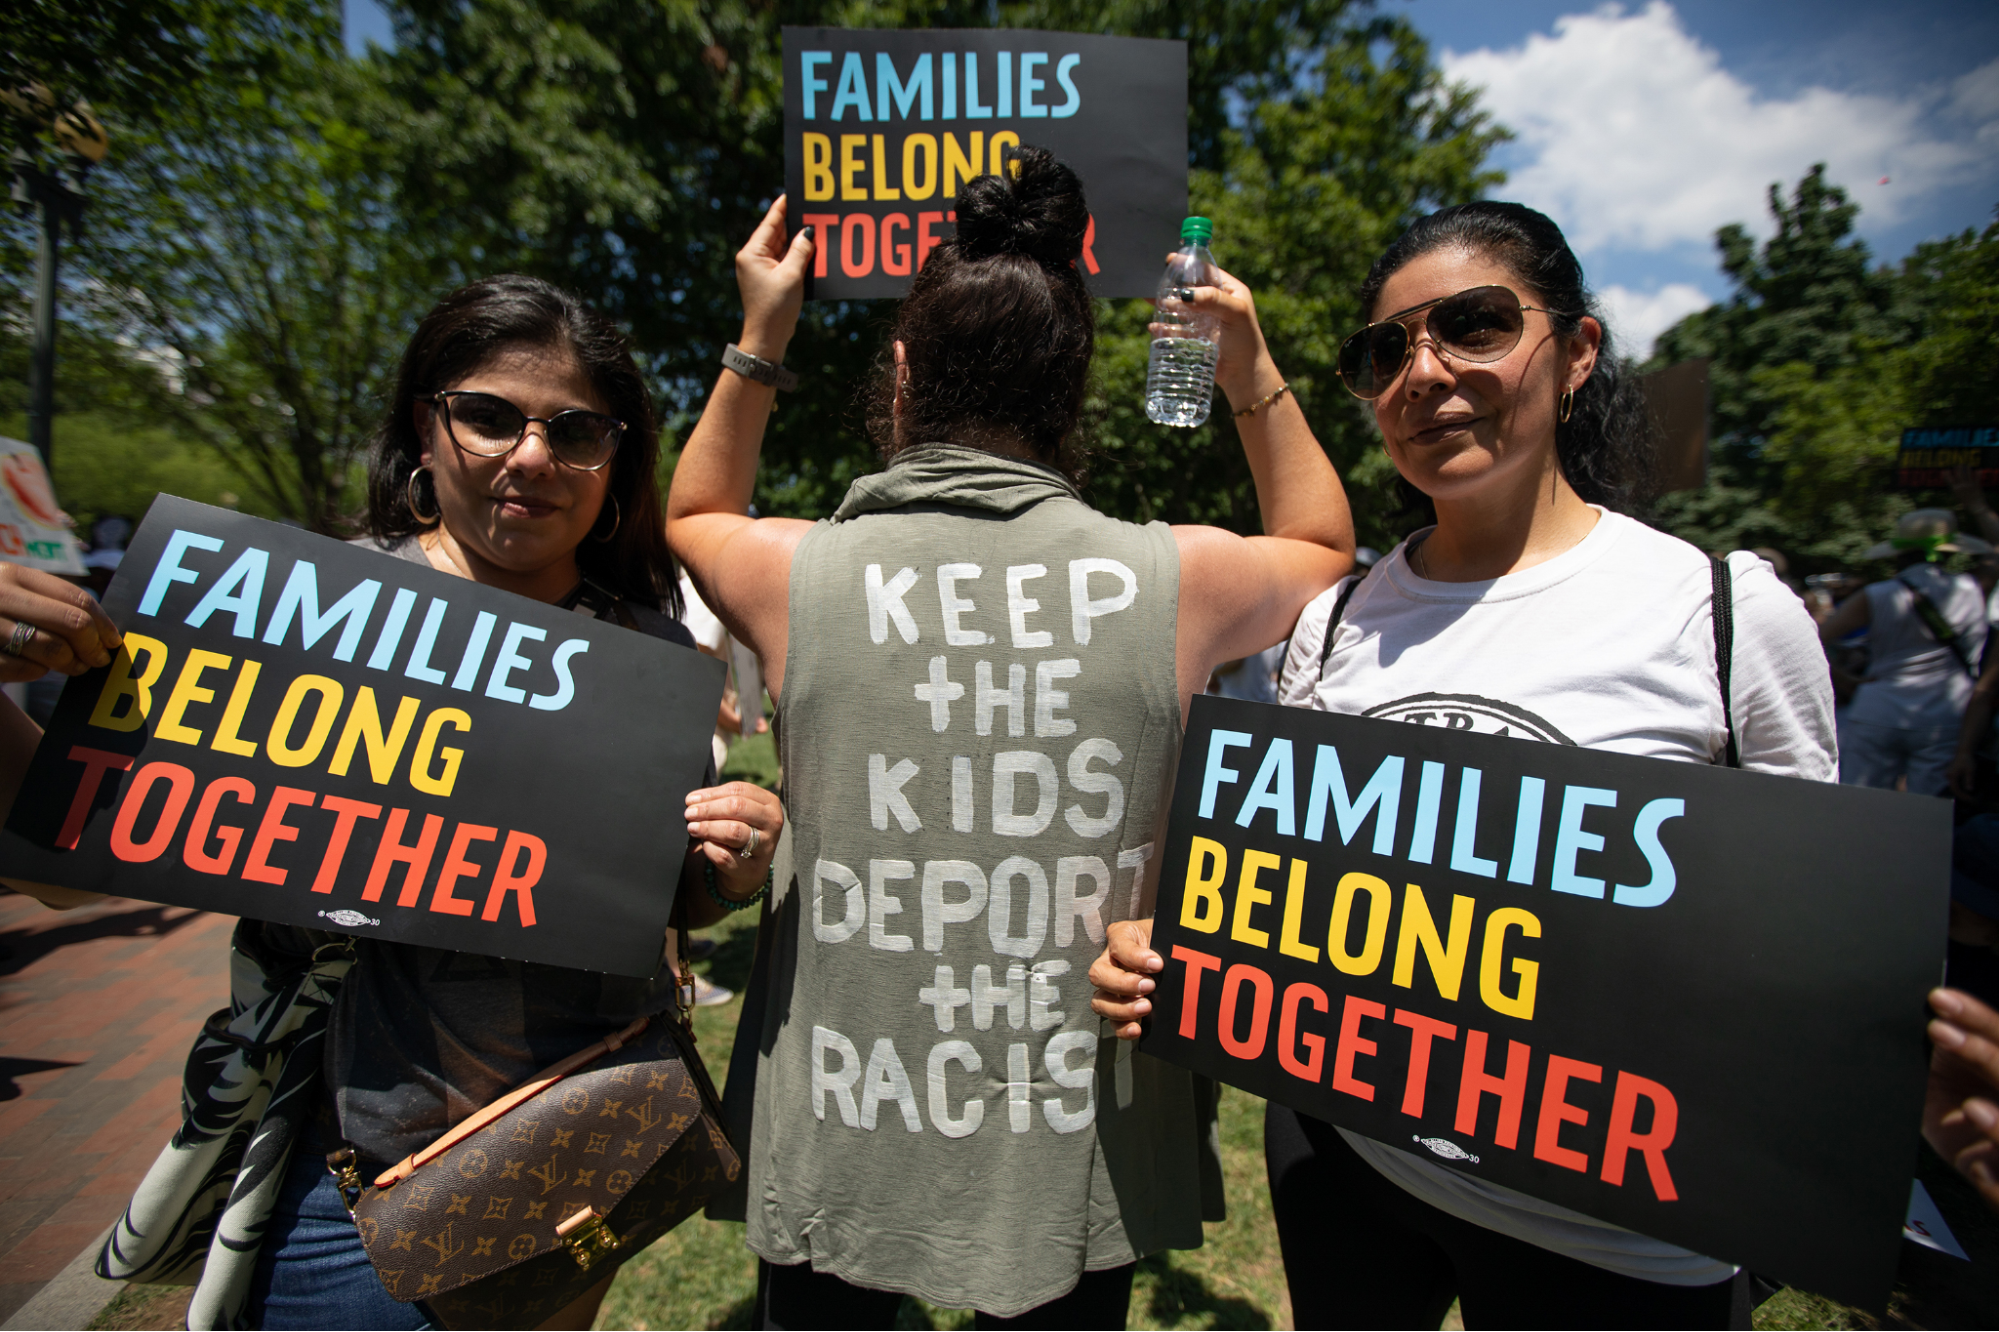 Three people with signs a t-shirts reading, "families belong together" and "keep the kids, deport the racists"